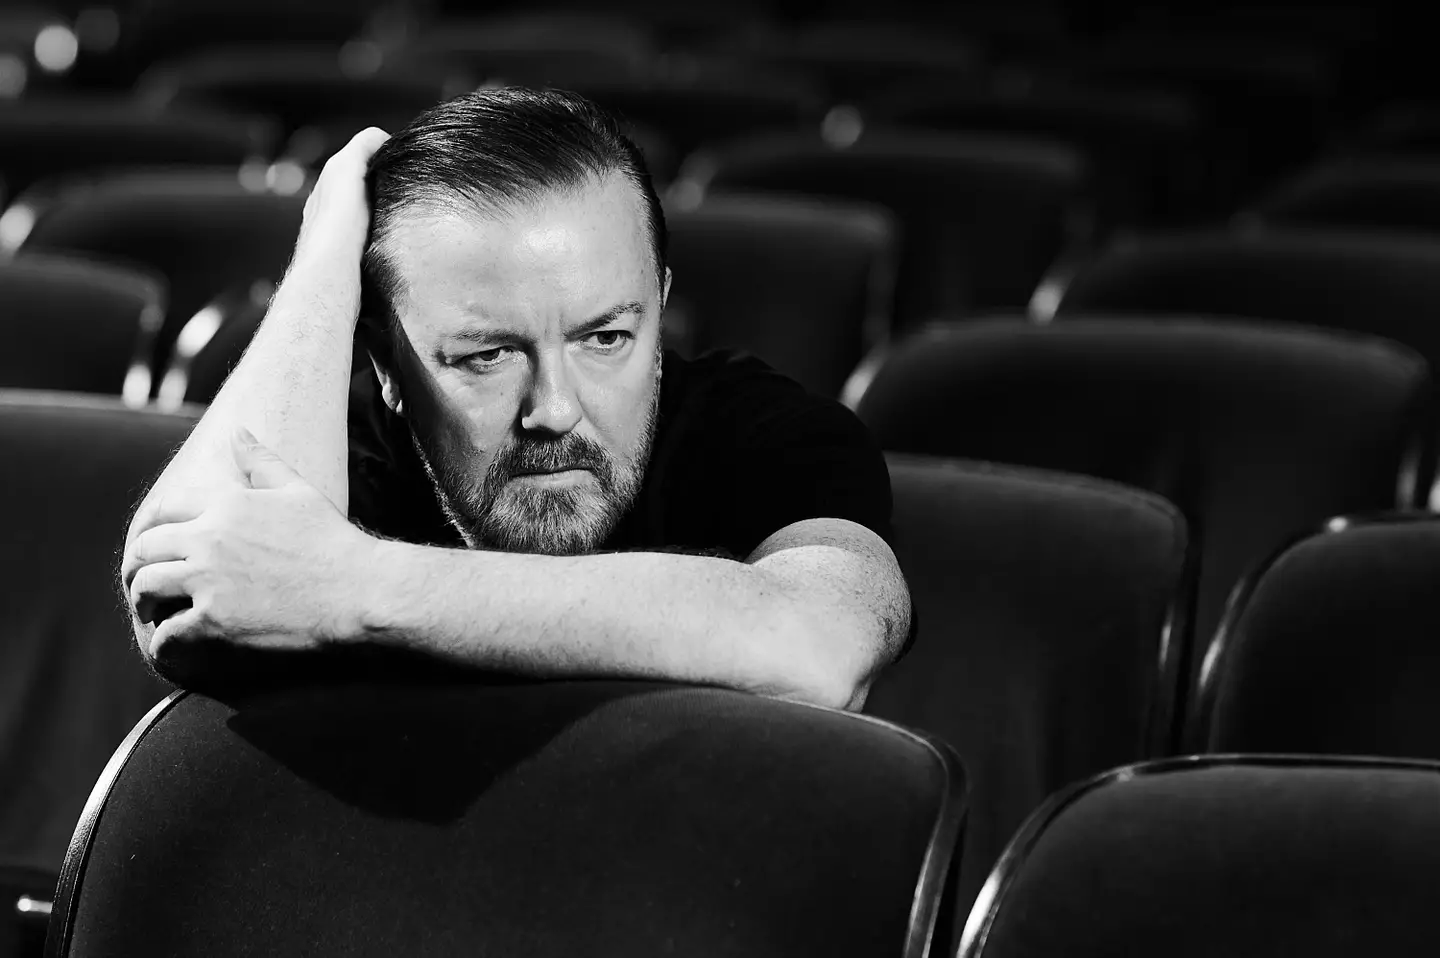 Ricky Gervais has voiced his opinion on the matter.